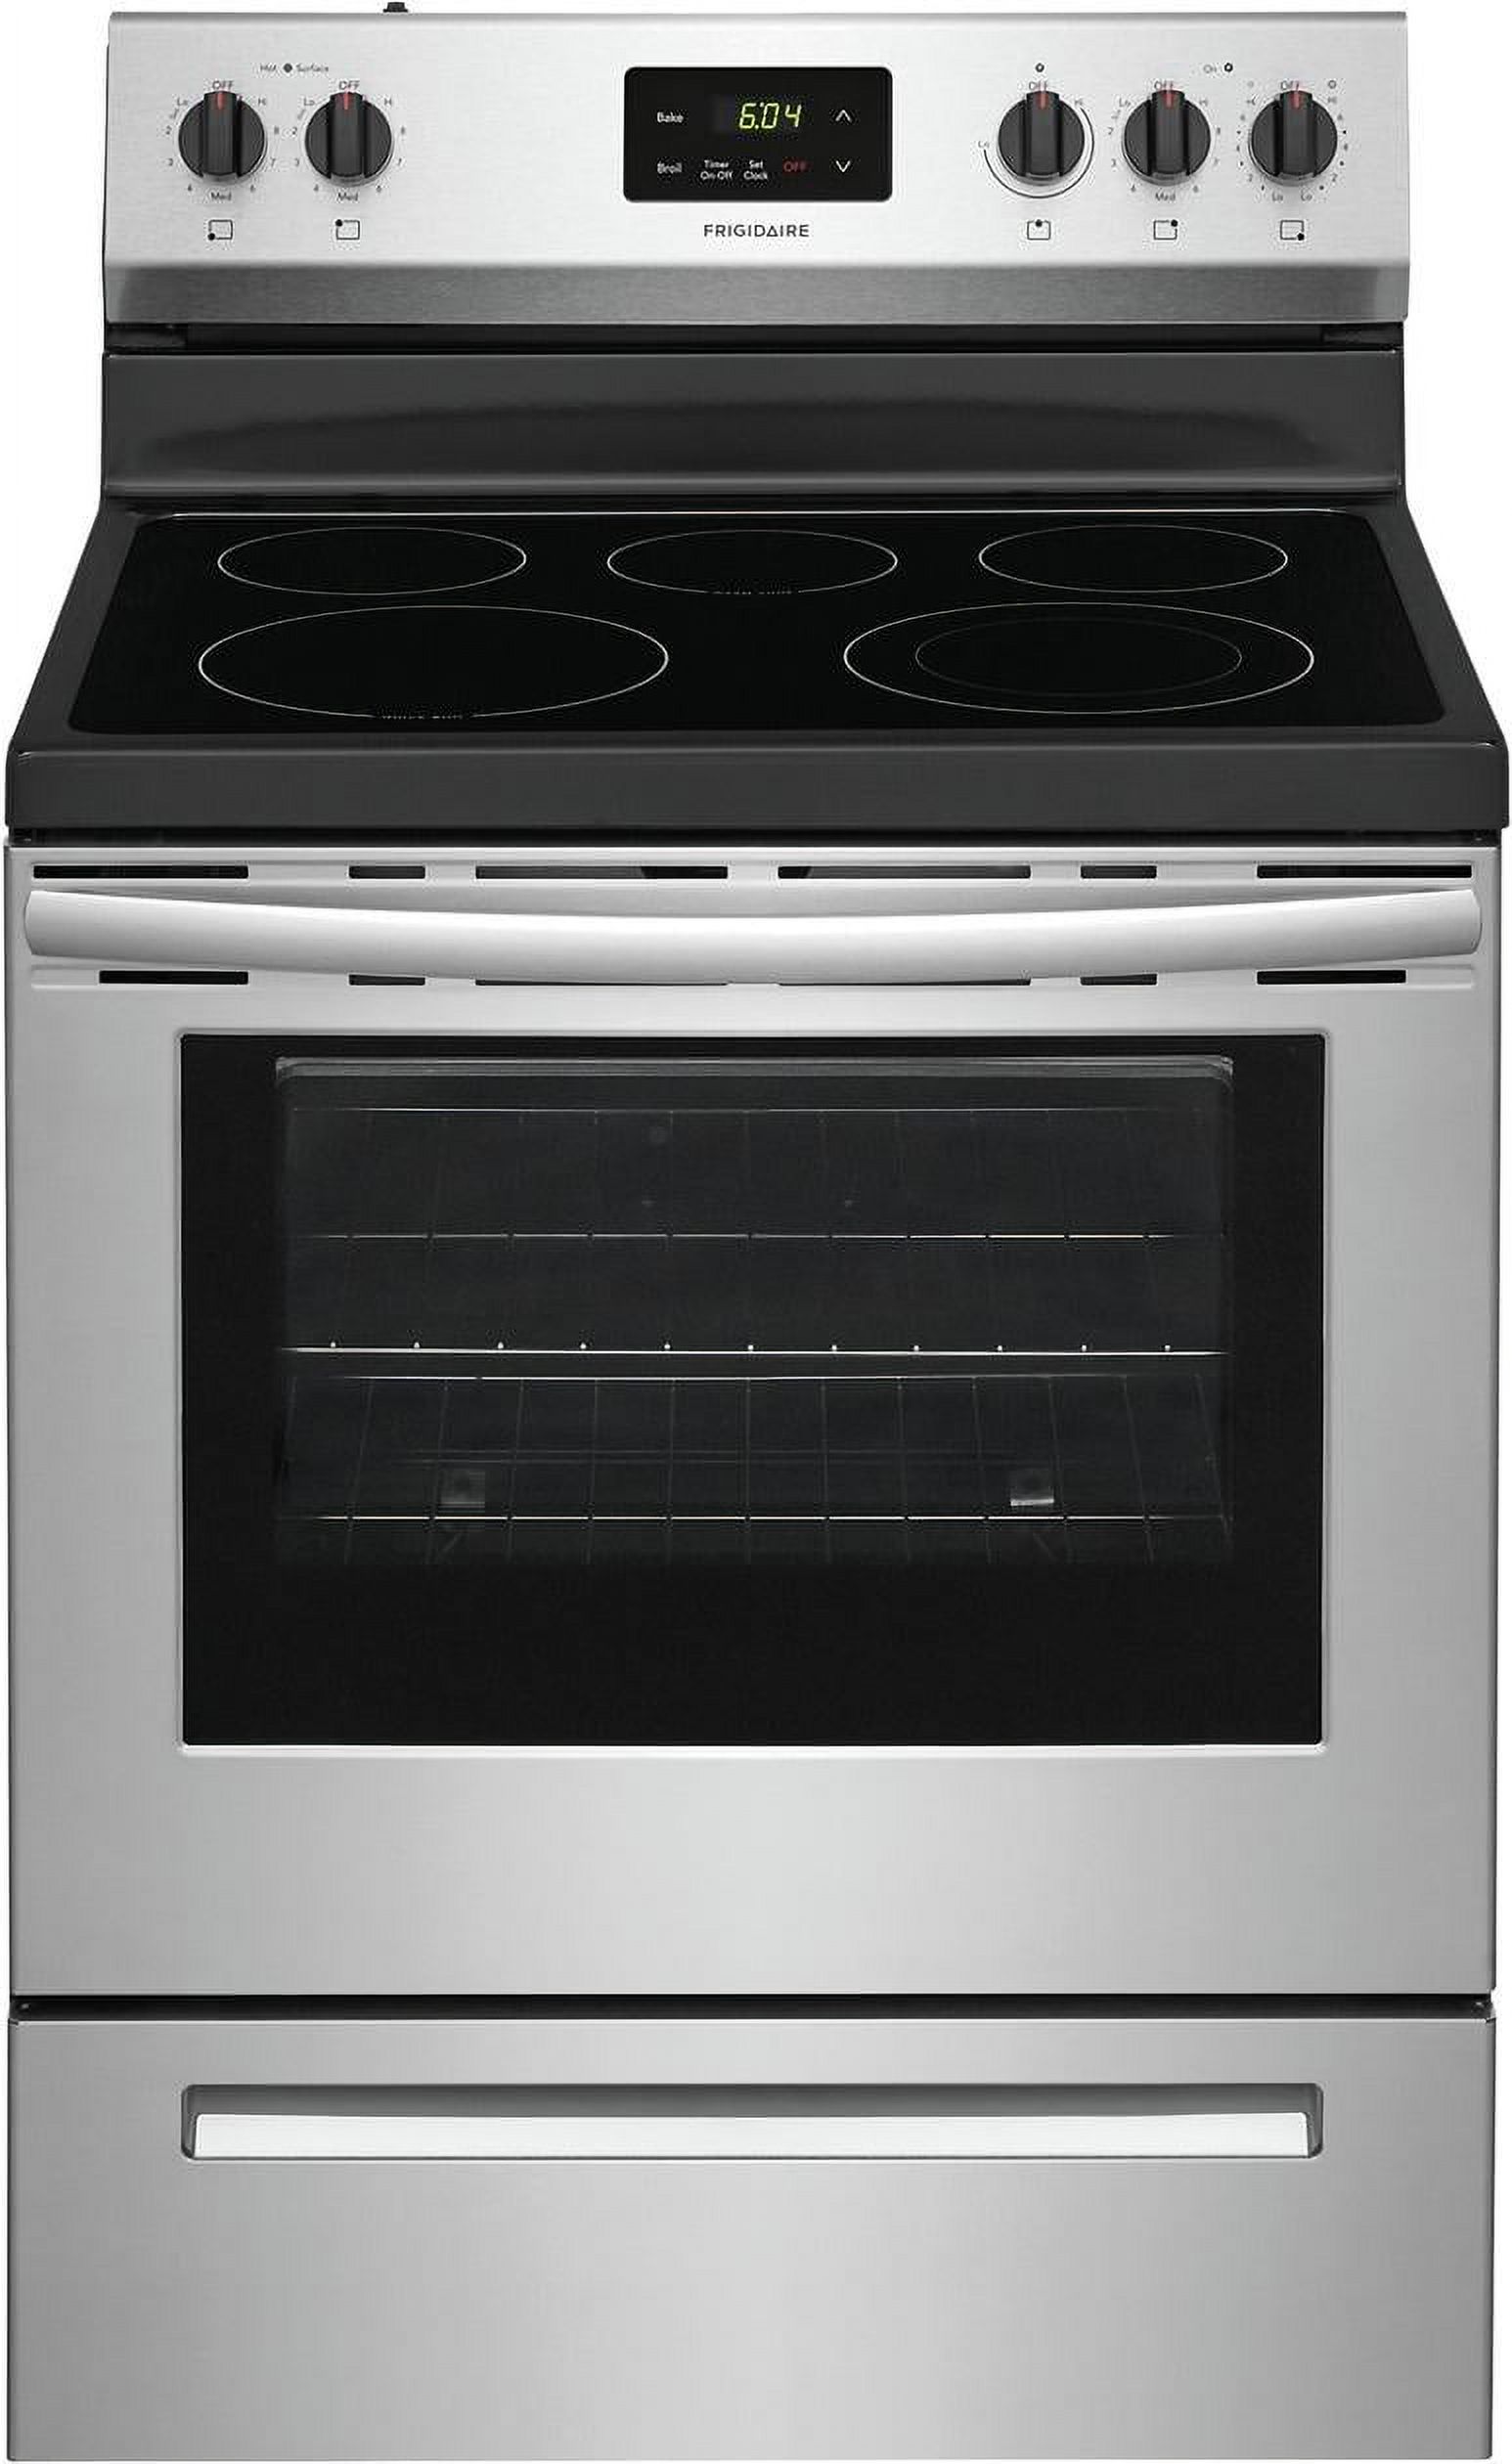 Frigidaire FCRE3052AS Electric Range, 30", Stainless Steel, 5 Elements, Glass Top ,Manual Clean Oven, 3000 Watt Quick Boil Element, Store-More™ Storage Drawer, SpaceWise® Expandable Element, Keep Warm Zone, Oven Capacity 5.3 CuFt, Product Dimensions HxWxD (in) 46 9/16" x 29 7/8" x 25 3/4", Product Weight (lb) 147.25 - image 1 of 7